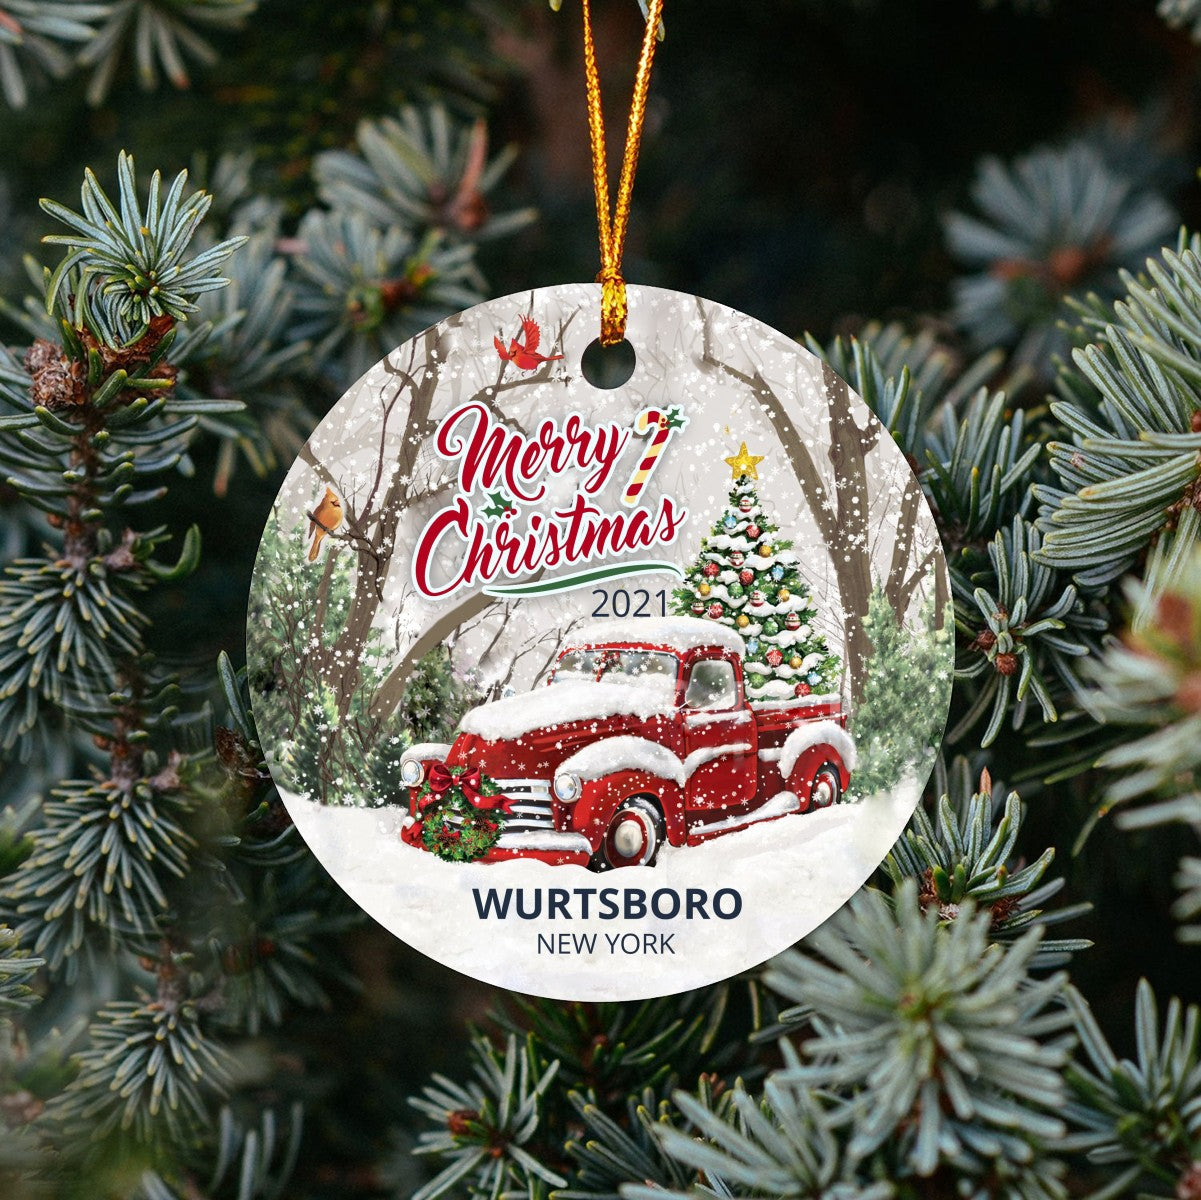 Christmas Tree Ornaments Wurtsboro - Ornament With Name City, State Wurtsboro New York NY Ornament - Red Truck Xmas Ornaments 3'' Plastic Gift For Family, Friend And Housewarming